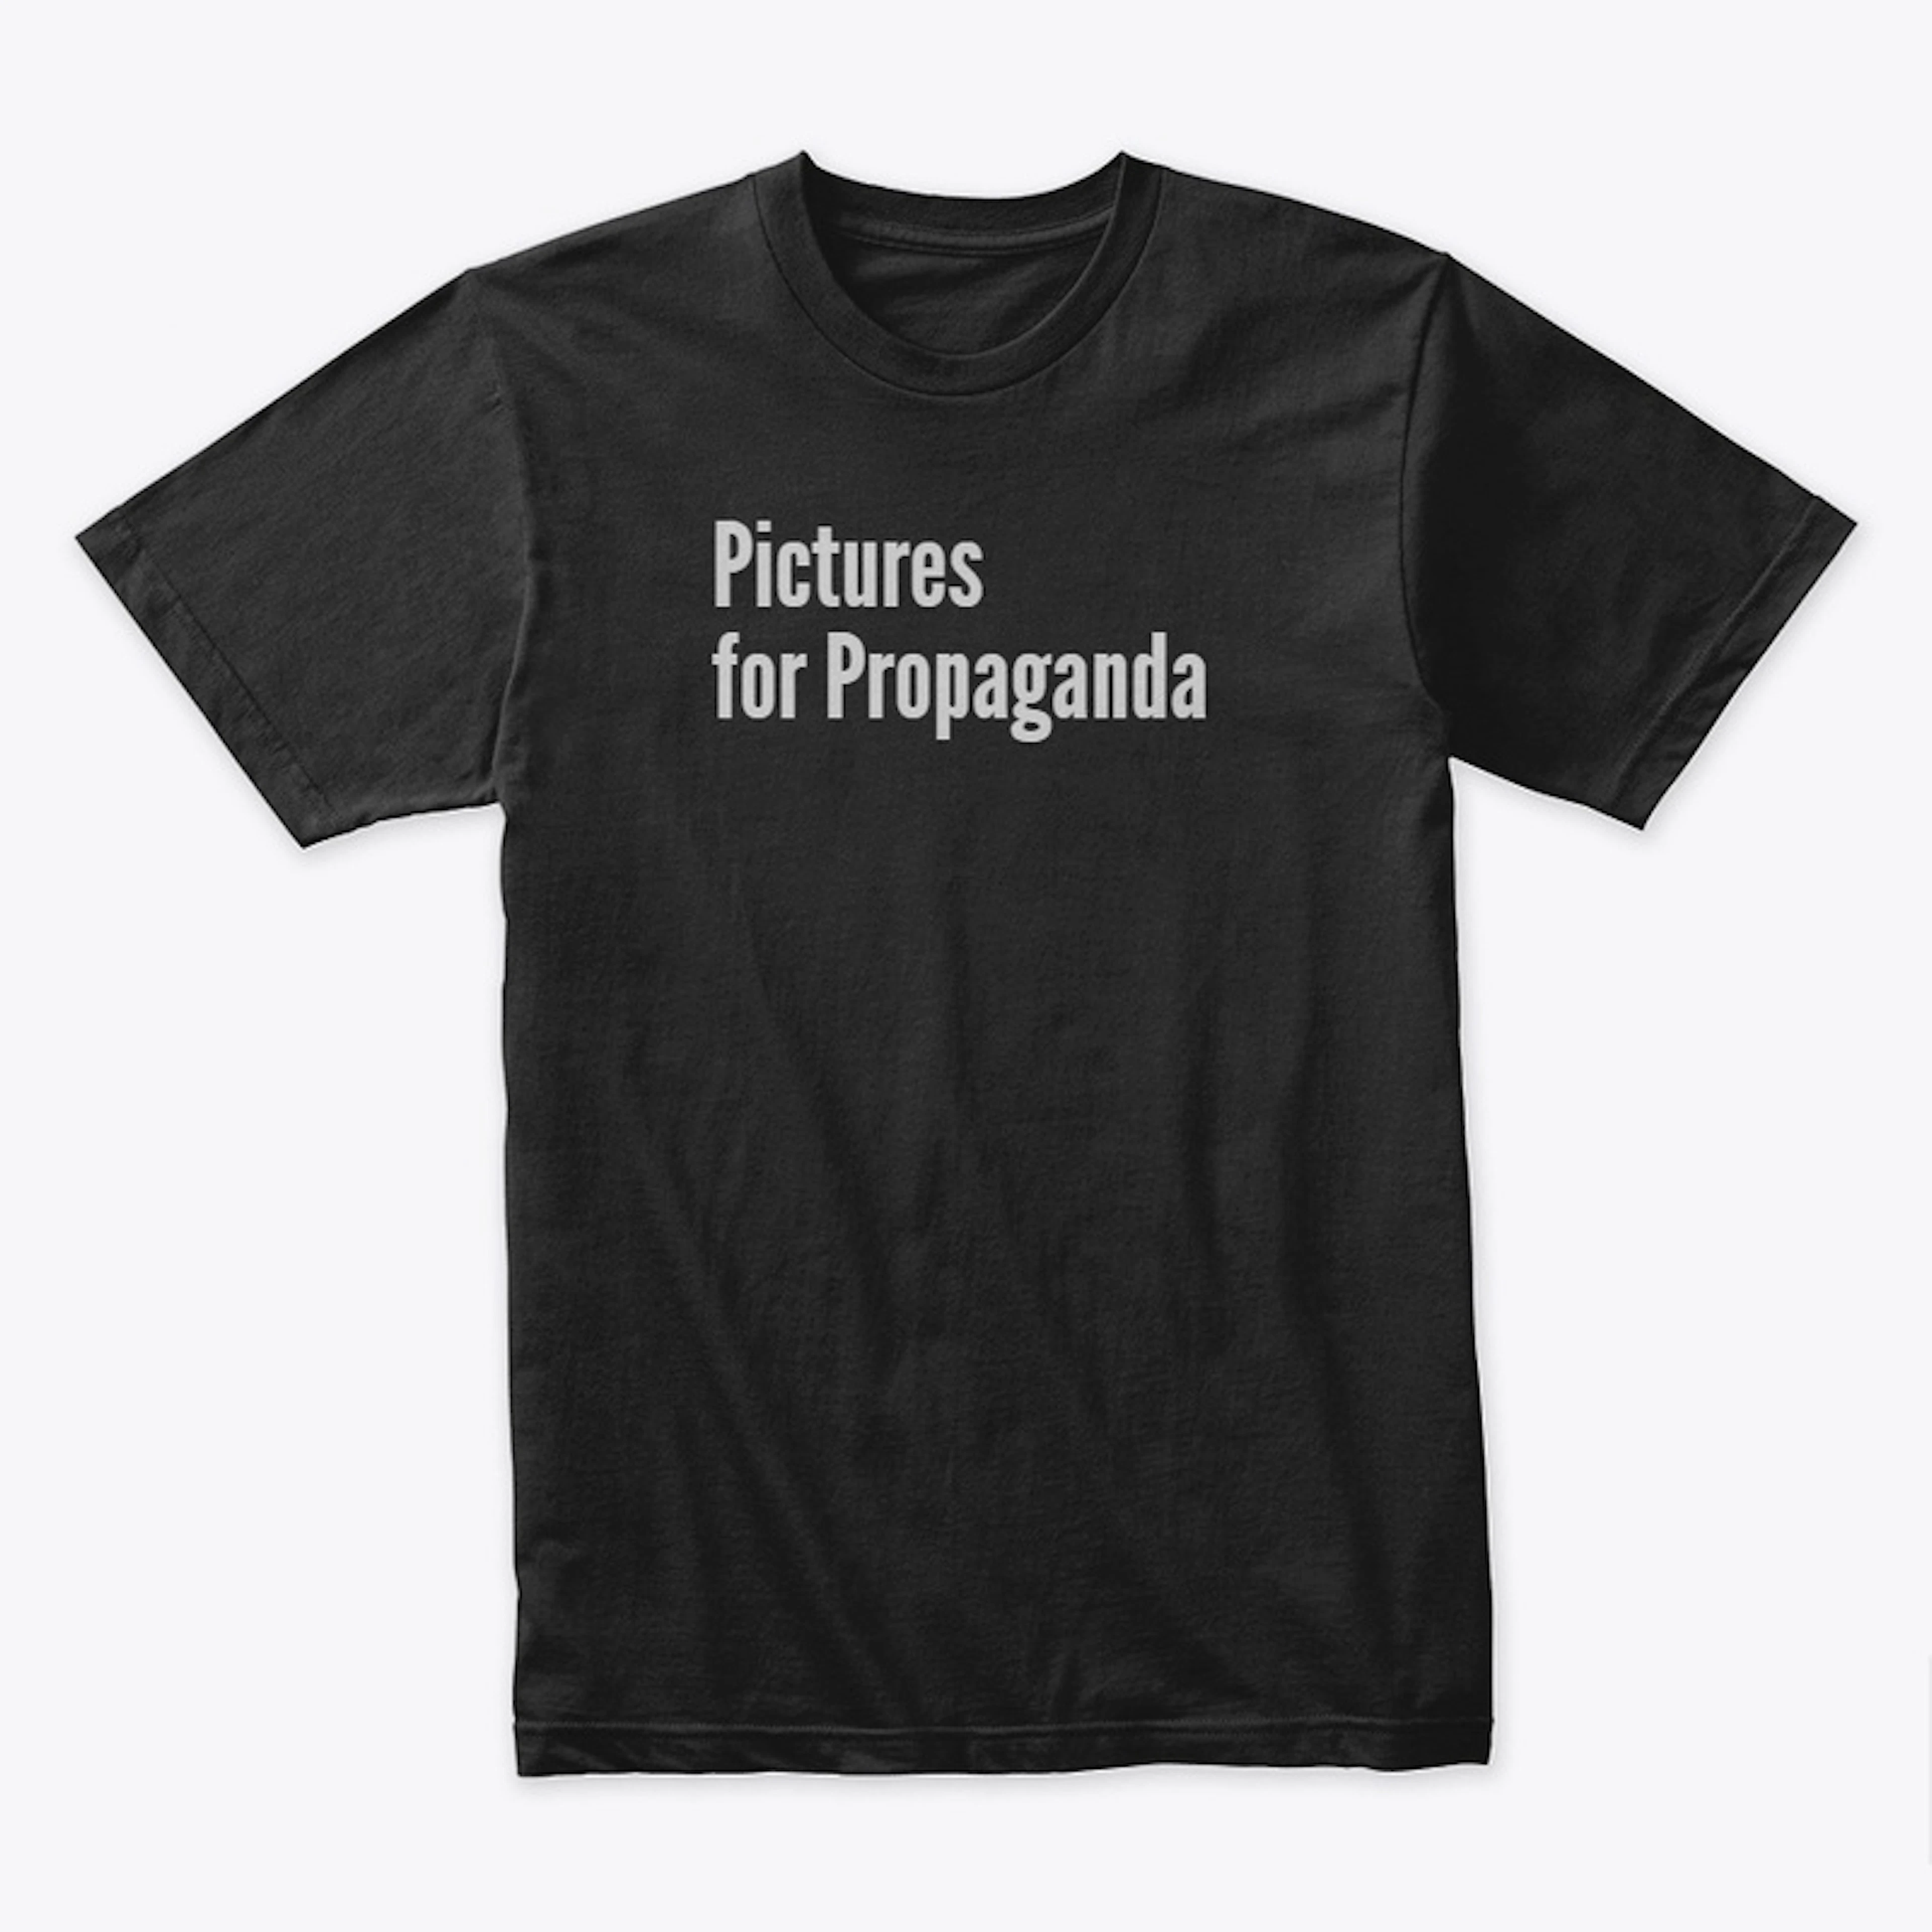 Pictures for Propaganda